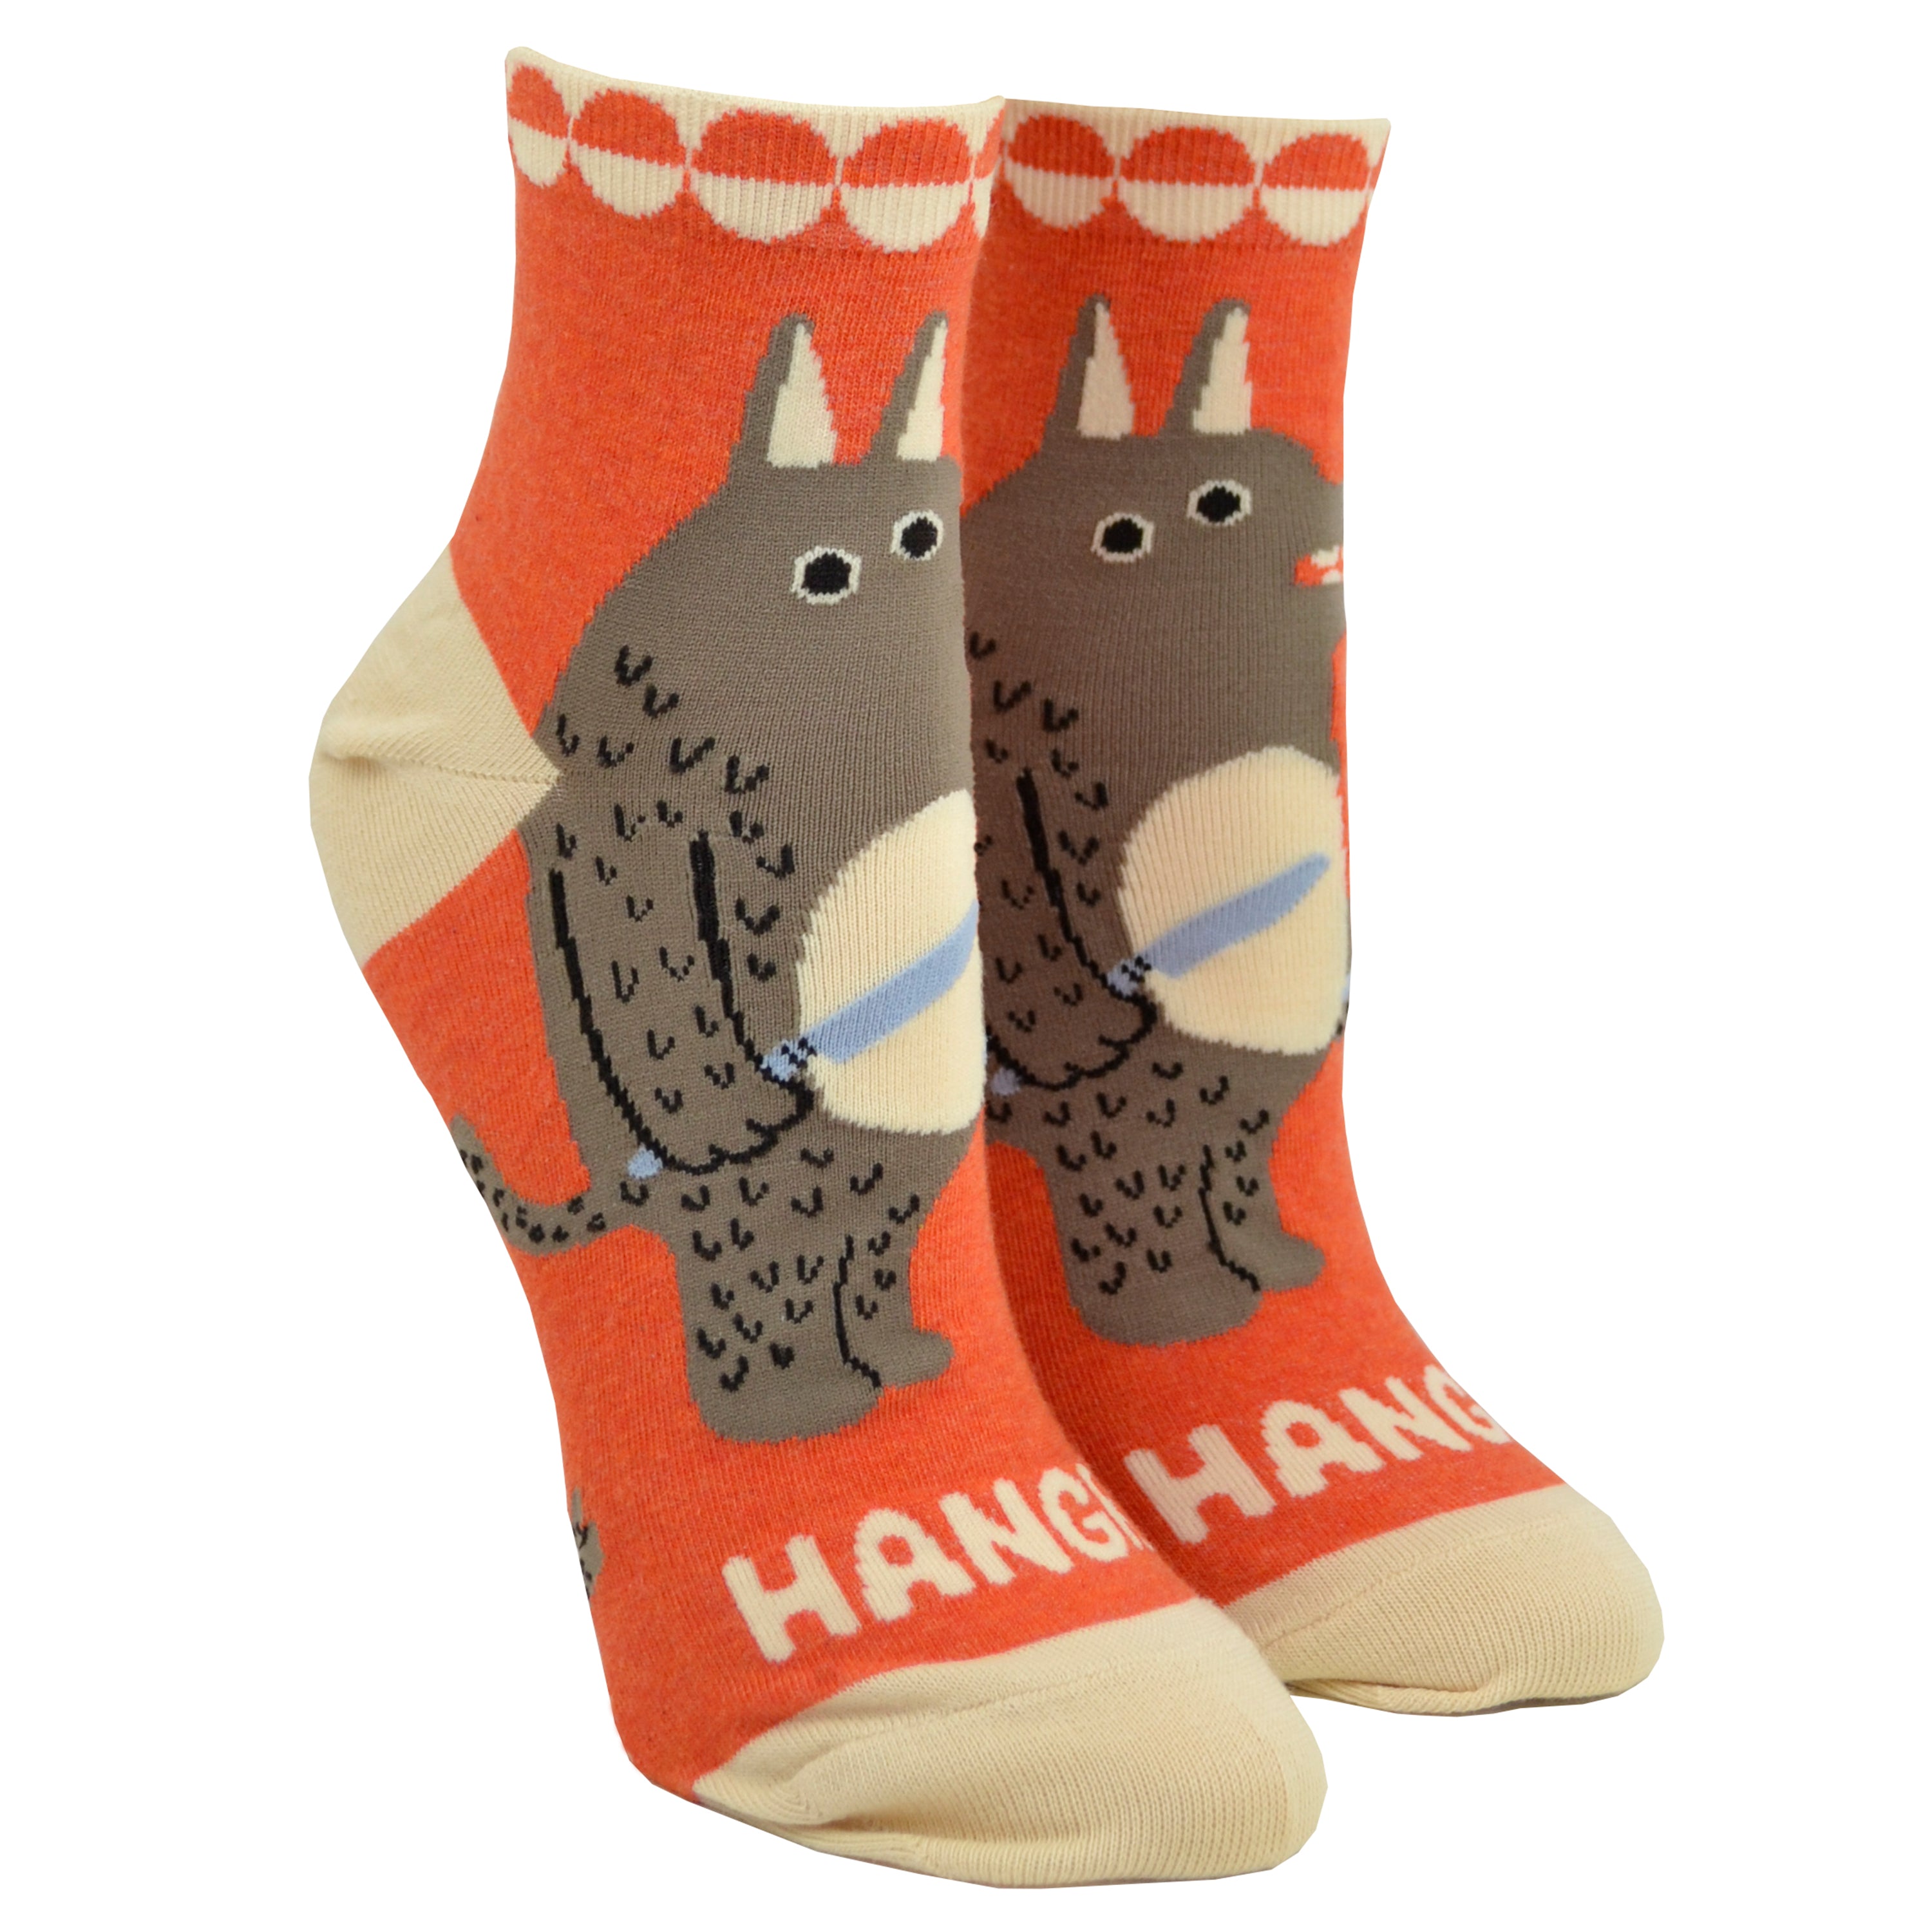 Shown on foot forms from the side, a pair of women's Blue Q cotton ankle socks in orange with a cream heel, toe, and cuff. The front of the socks features a cartoon wolf man with a knife and fork and the word 